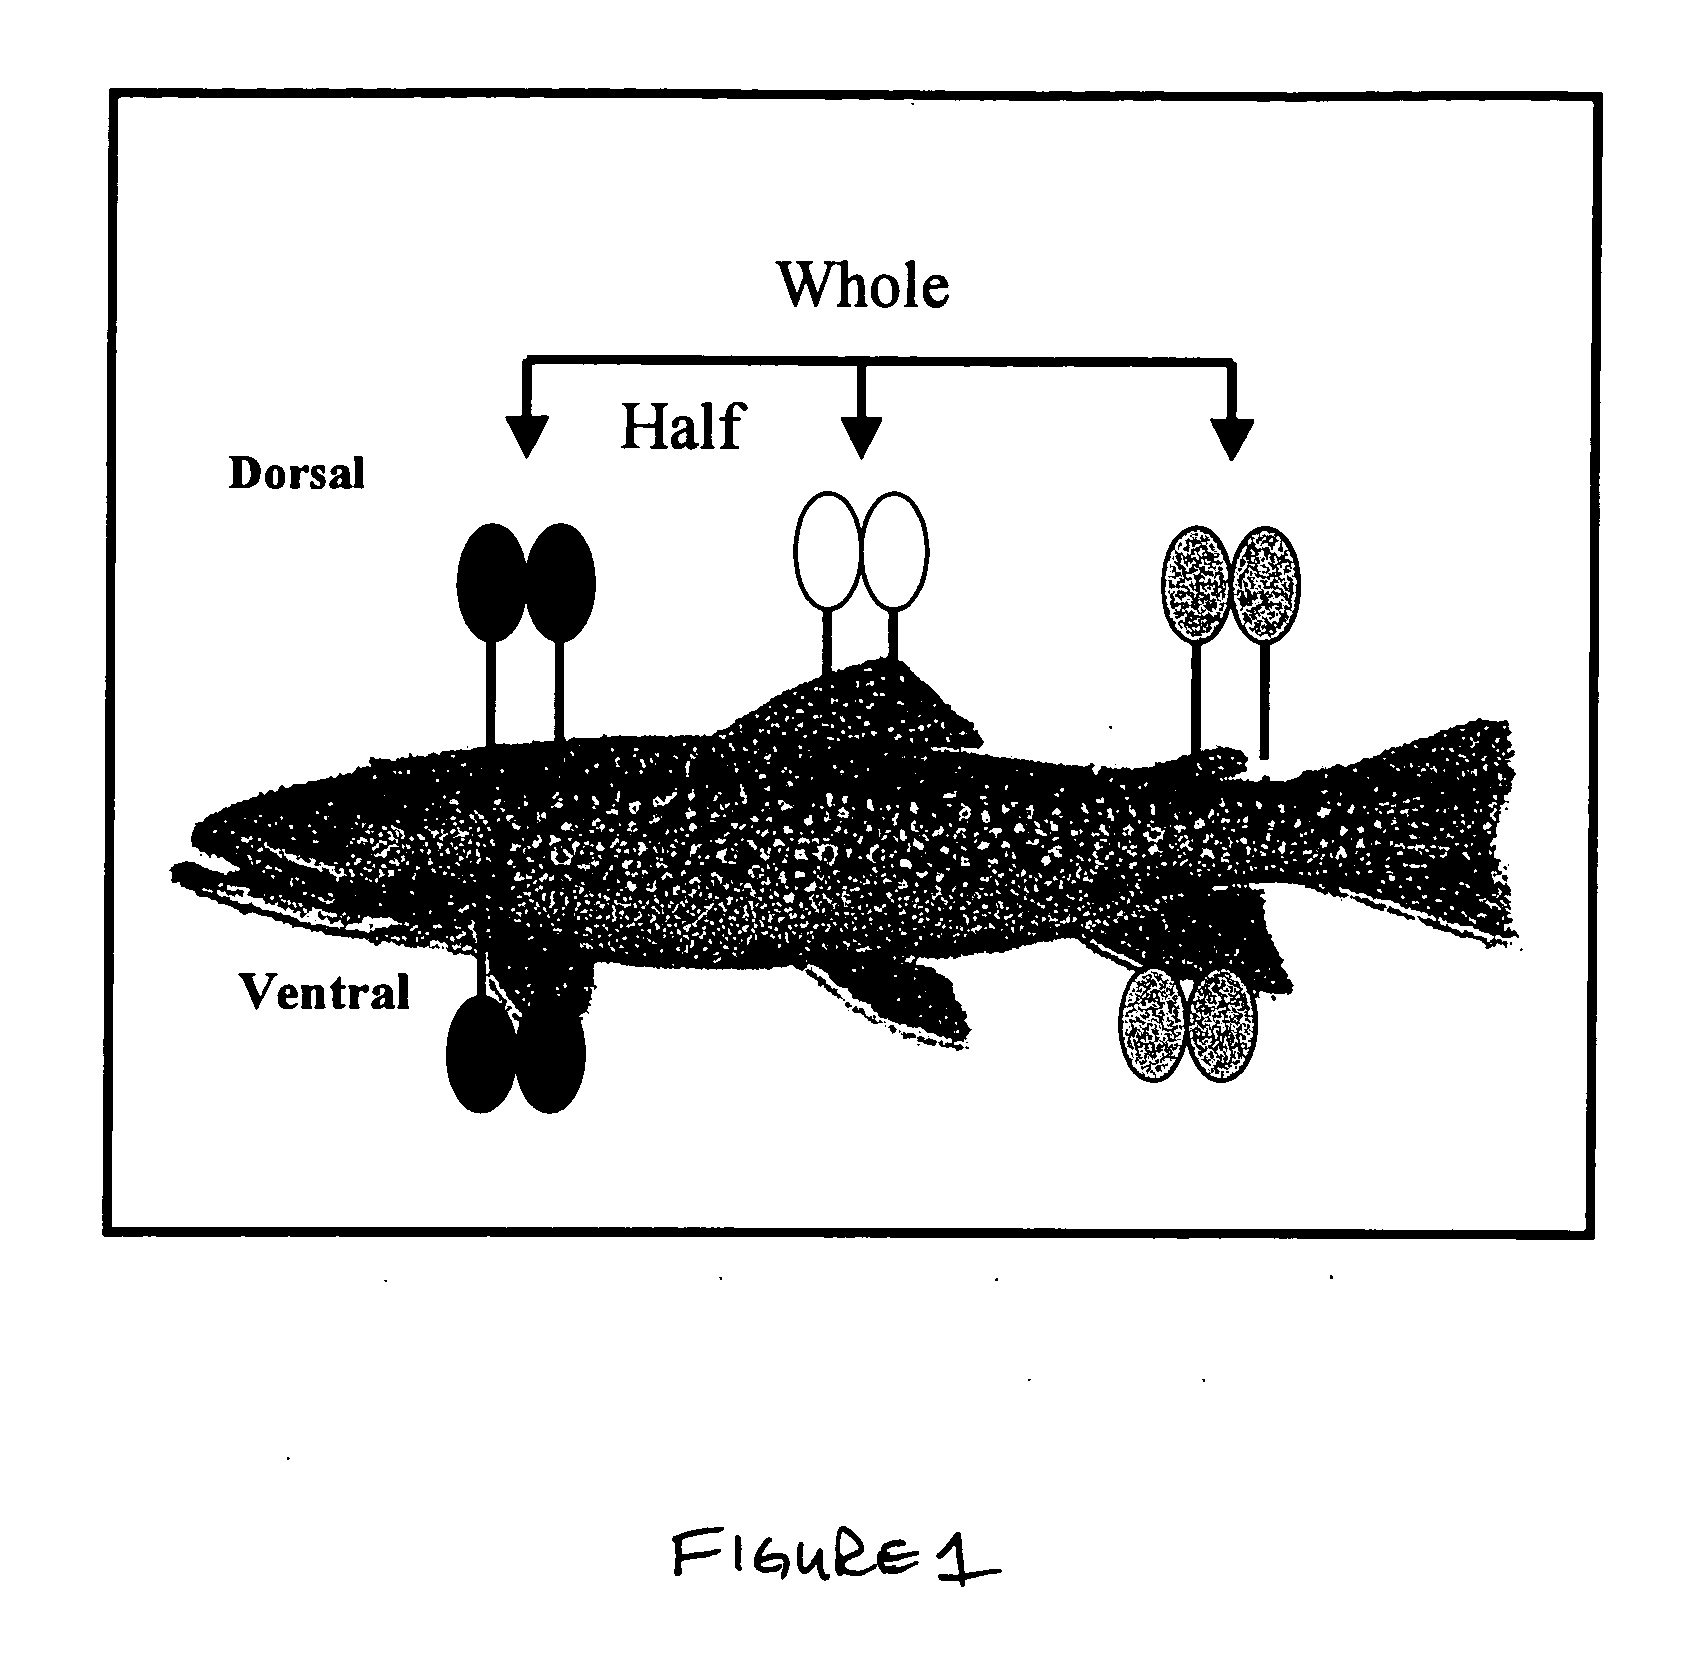 Method for determining fish composition using bioelectrical impedance analysis